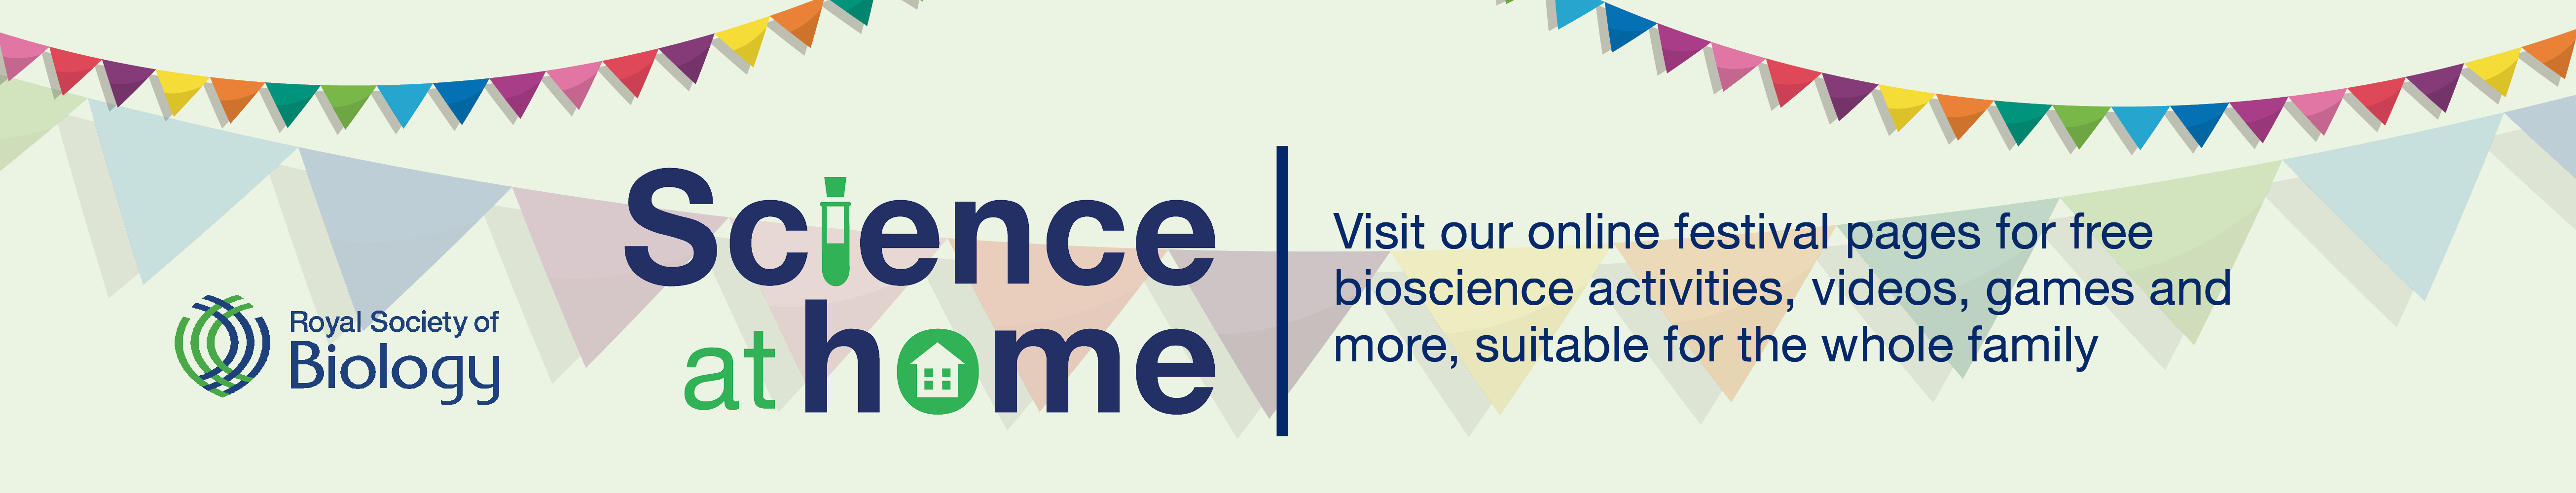 Science at home web banner without date updated background